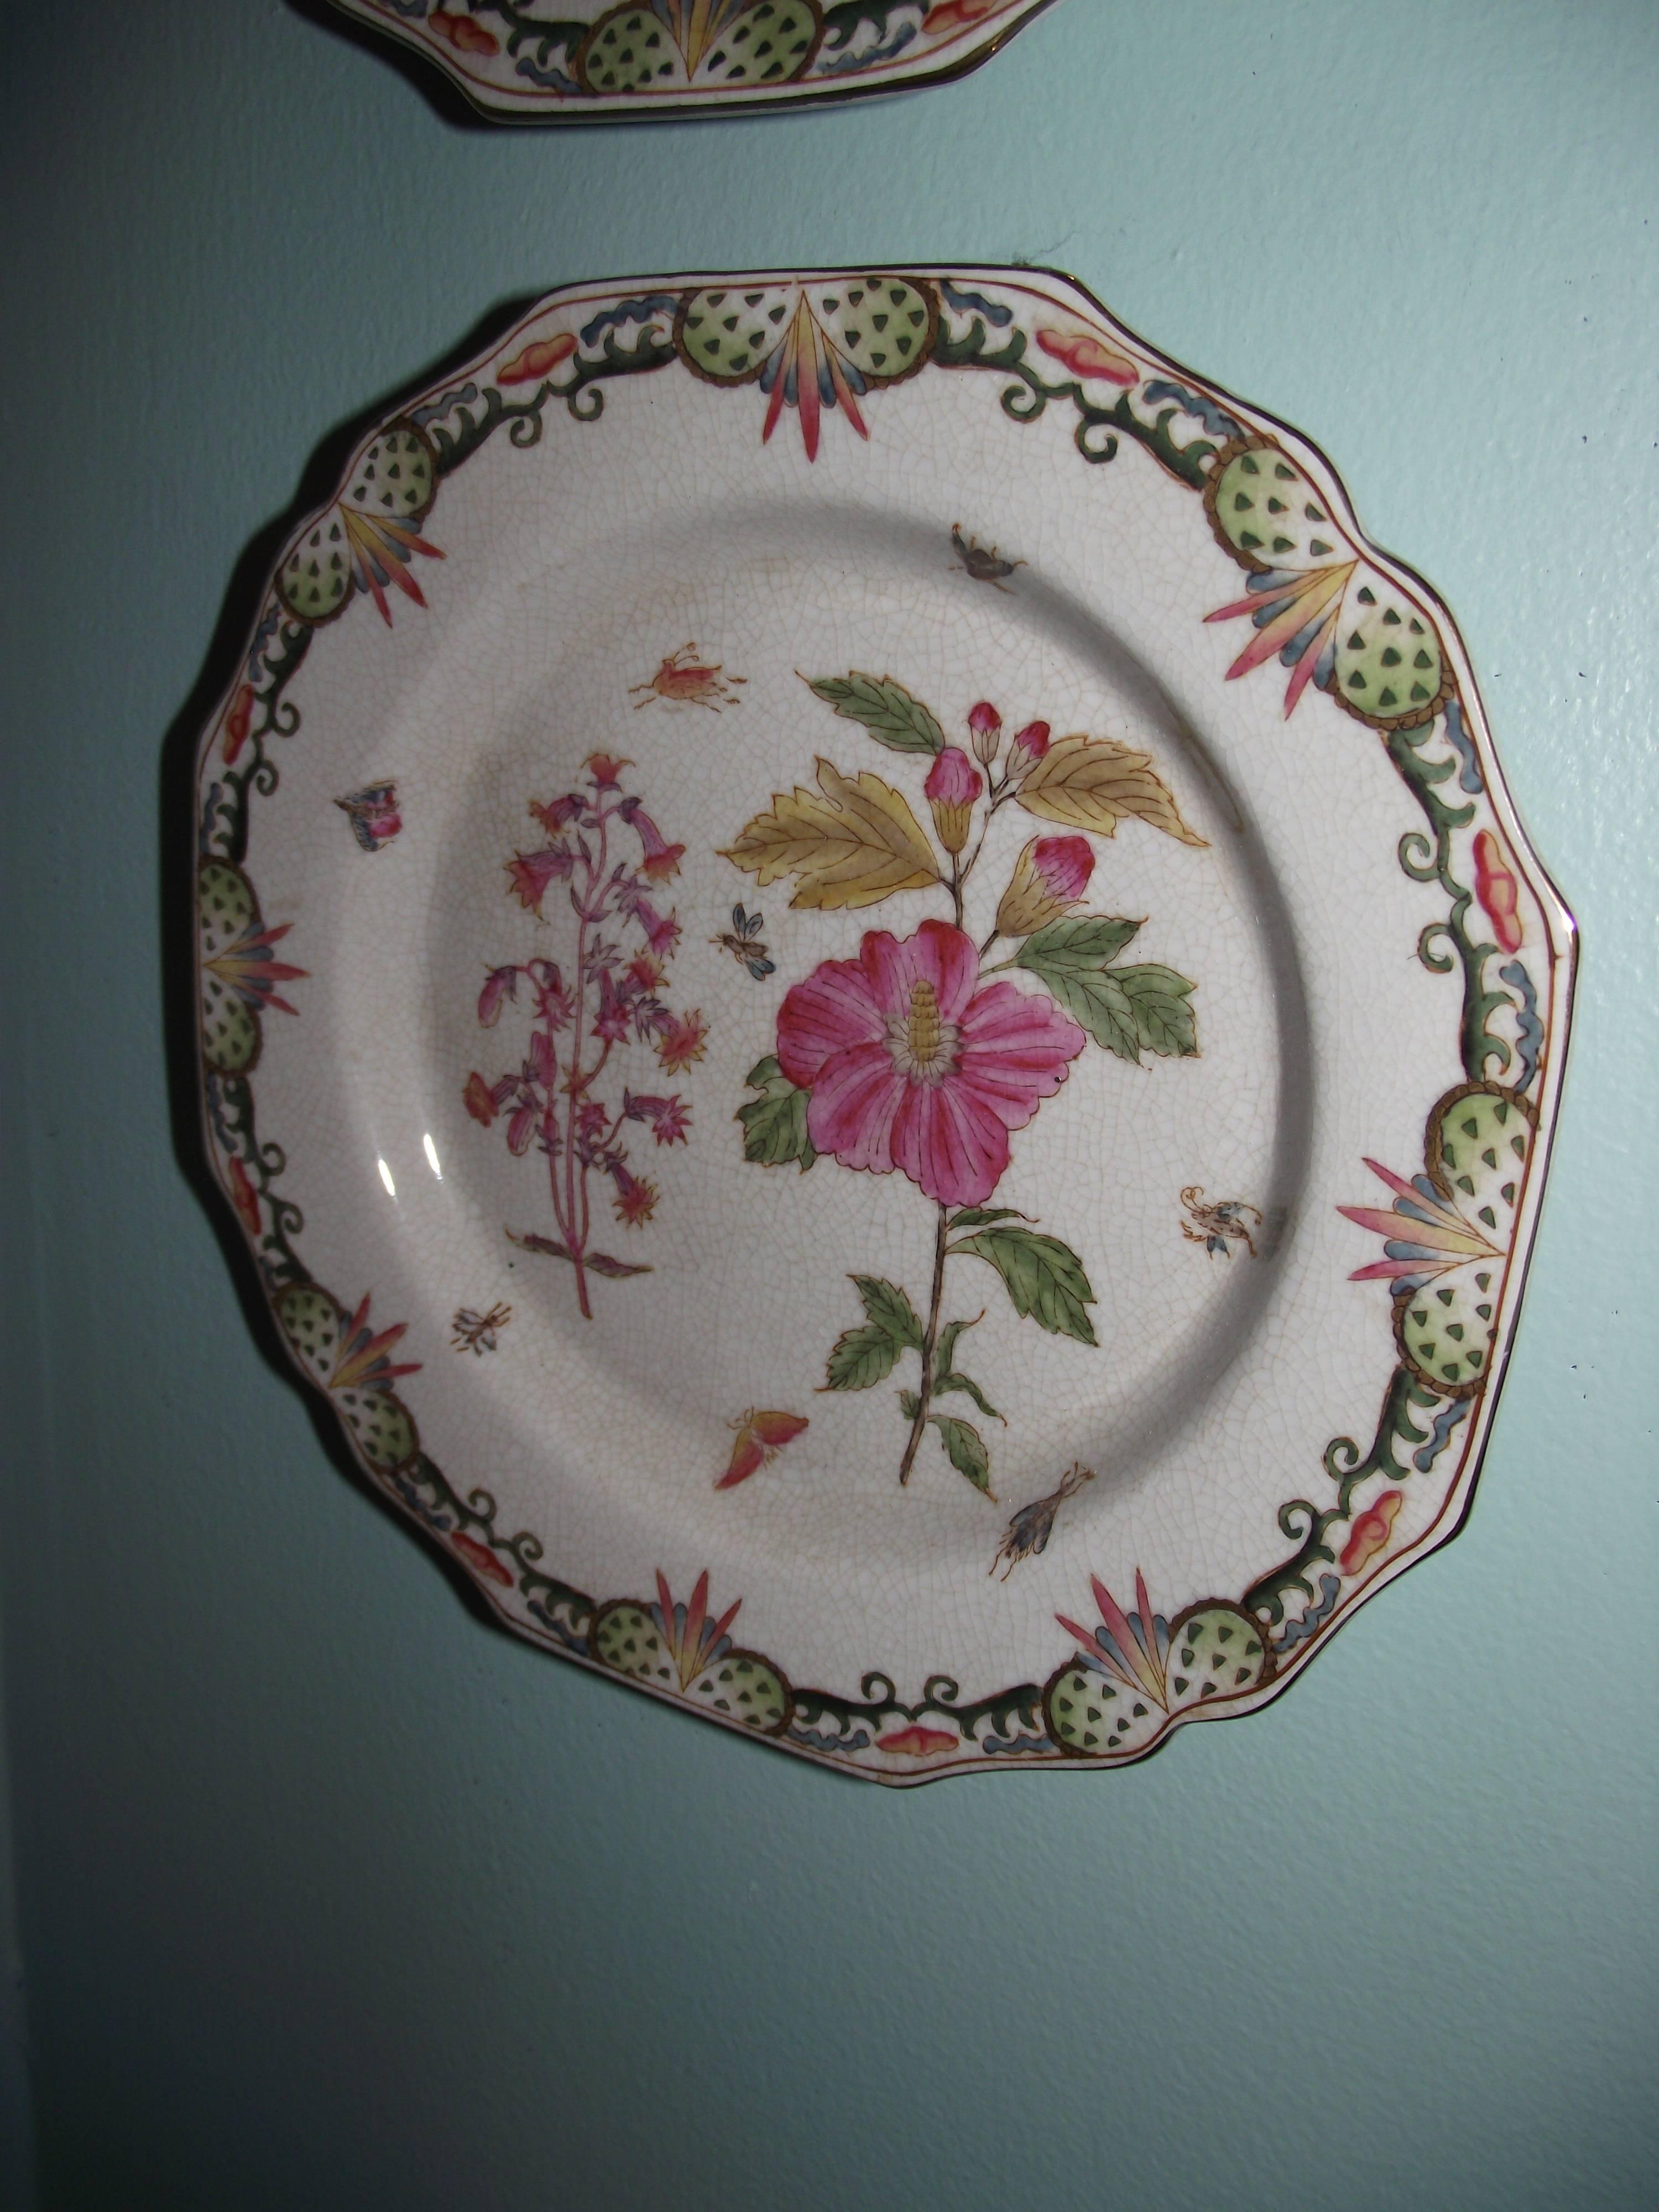 This set of plates are of heavy porcelain. The are pre drilled in the back for hanging. The set came with two plates with the same image. Great on plate stands or hung on the wall.